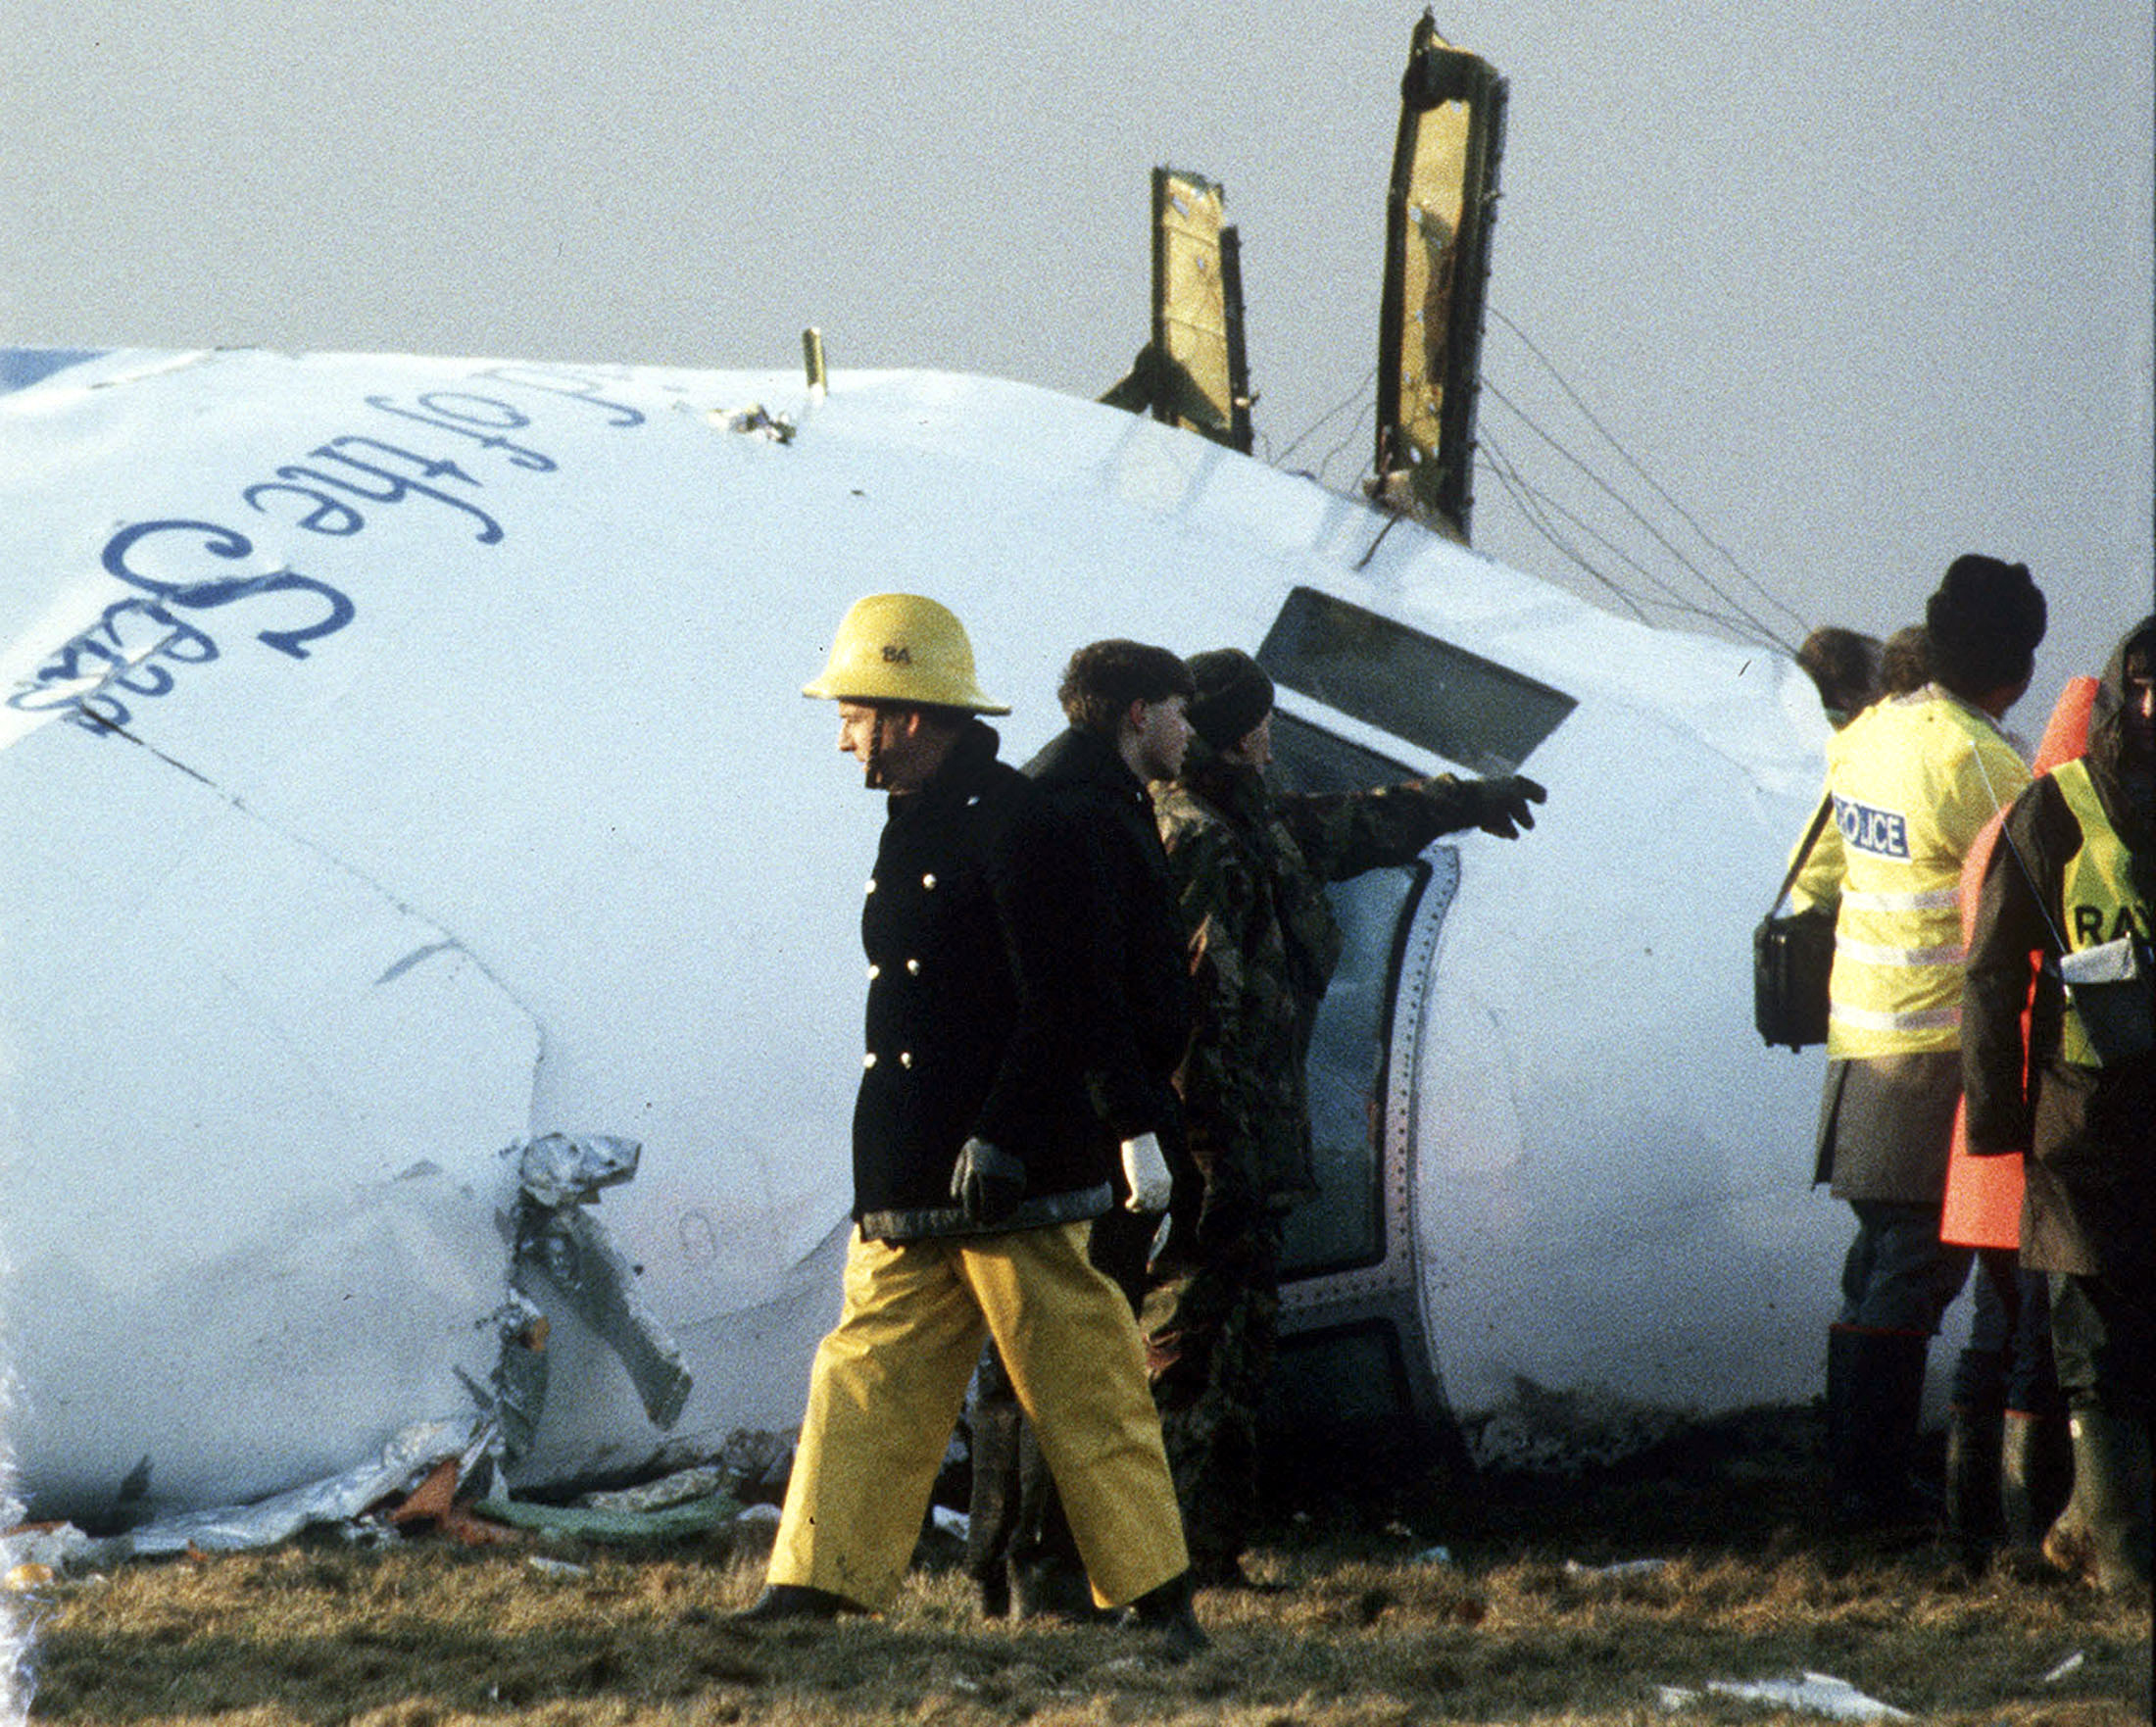 A December 23, 1988 file photo shows Scottish rescue workers and crash investigators search the area around the cockpit of Pan Am flight 103 in a farmer's field east of Lockerbie, Scotland. Scottish and U.S. investigators have identified two Libyan suspects believed to have been involved in the 1988 Lockerbie airline bombing which killed 270 people, Scottish prosecutors said on Thursday. REUTERS/Greg Bos